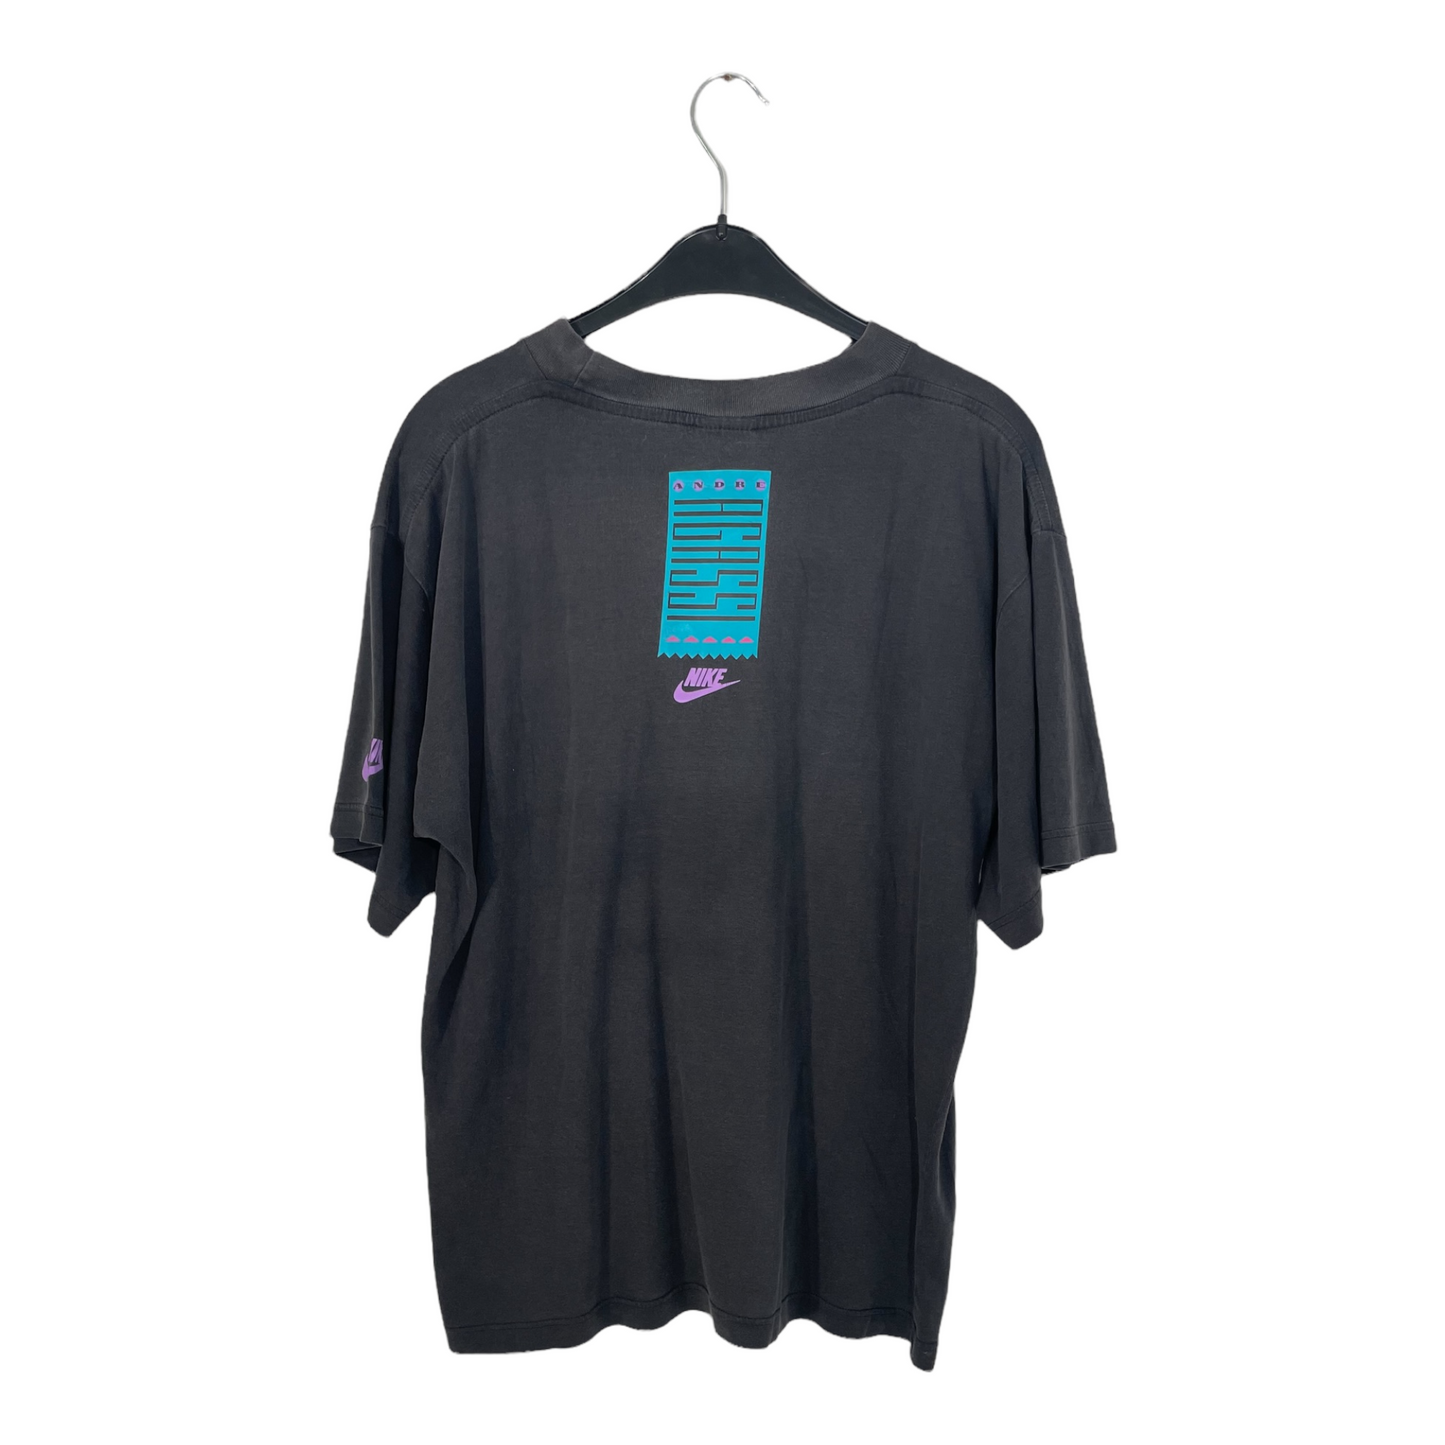 Nike “André Agassi” Tennis T-Shirt